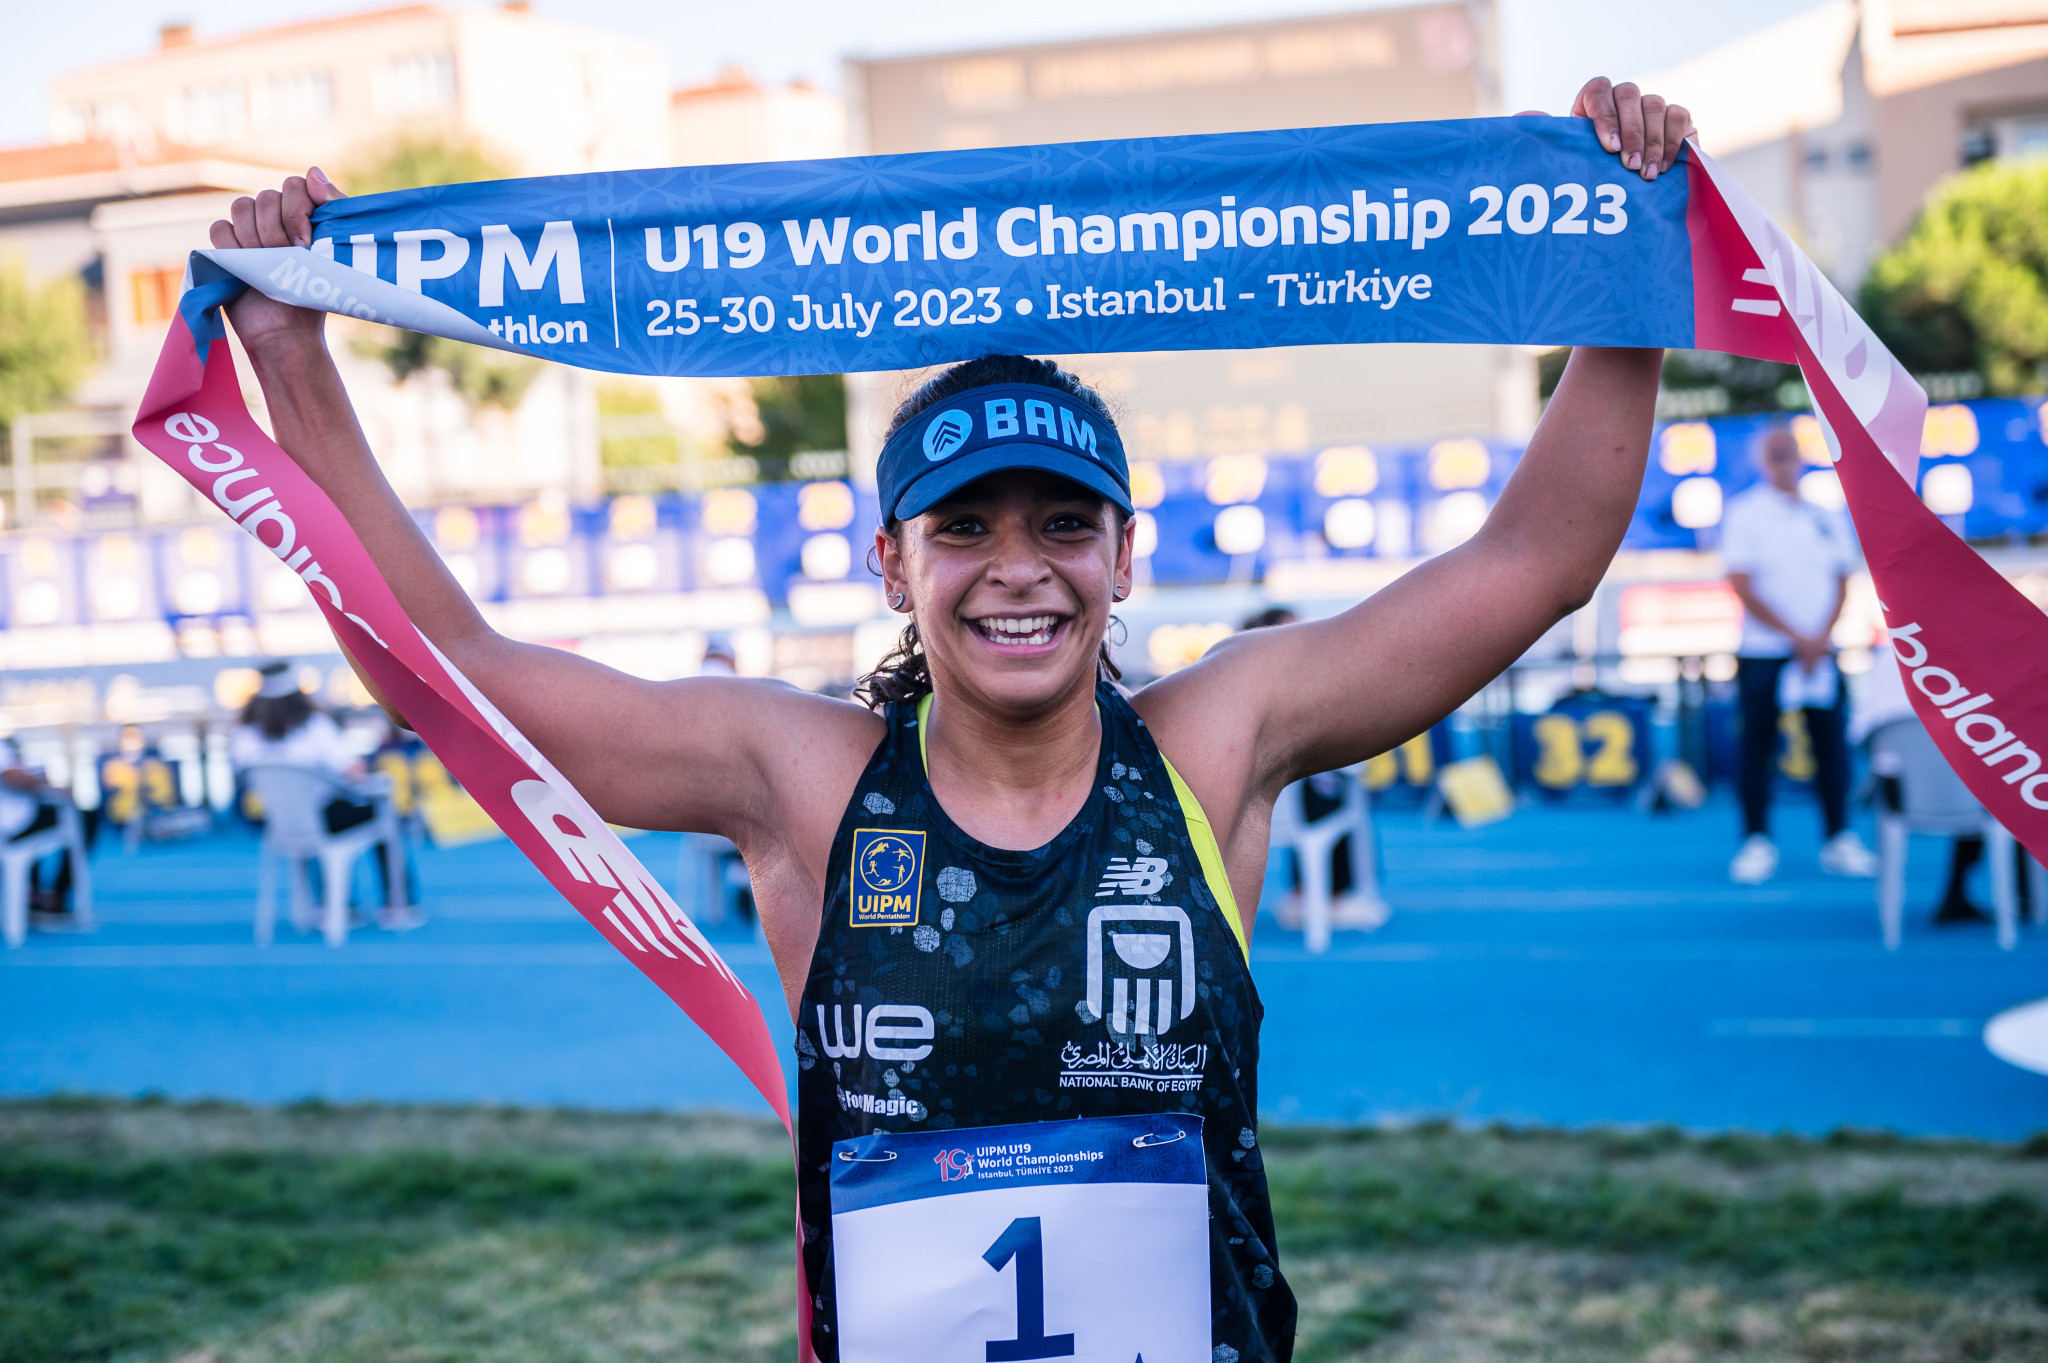 Egypt's Malak Ismail prevailed in a thrilling laser run to take women's individual gold ©UIPM/Filip Komorous